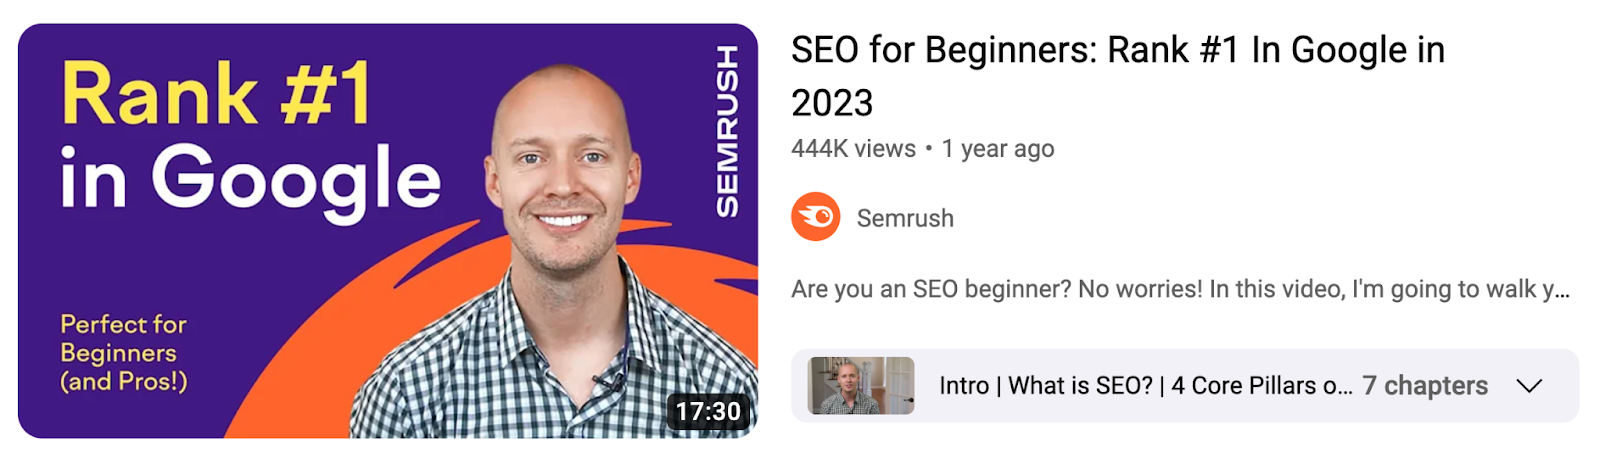 A YouTube video by Semrush titled "SEO for Beginners: Rank #1 in Google in 2023"